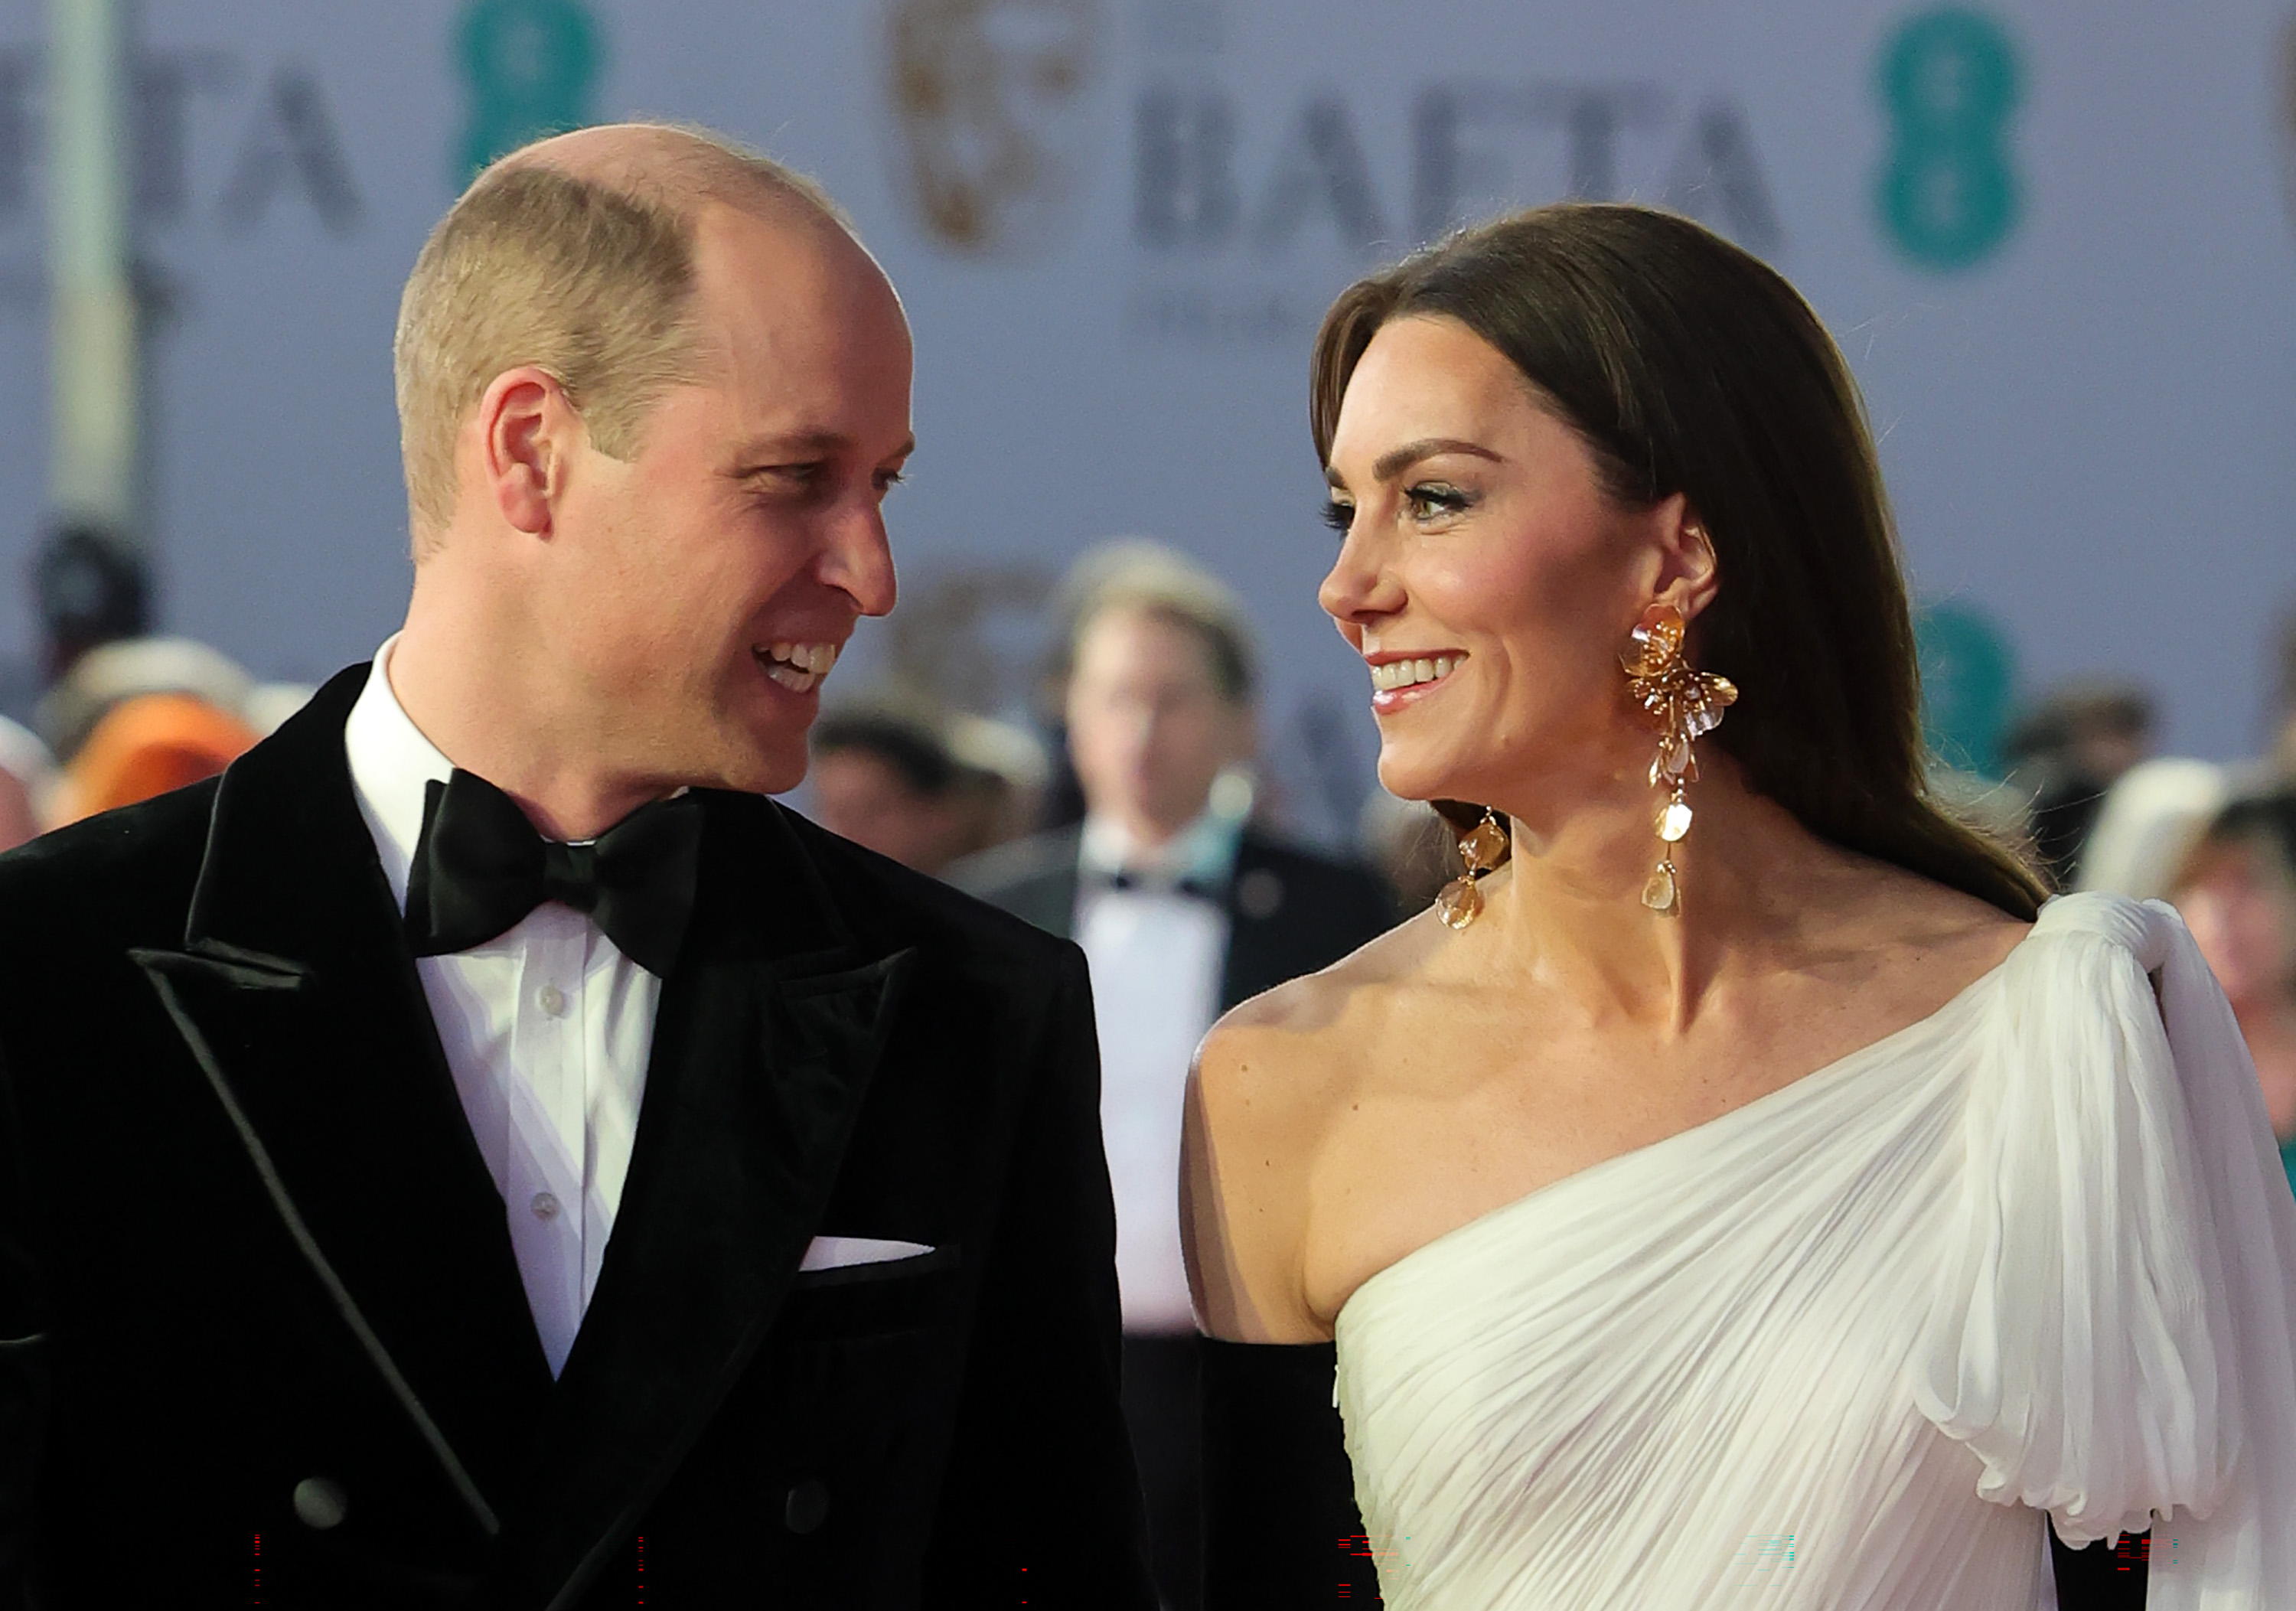 Prince William and Princess Catherine at the EE BAFTA Film Awards in London, England on February 19, 2023 | Source: Getty Images